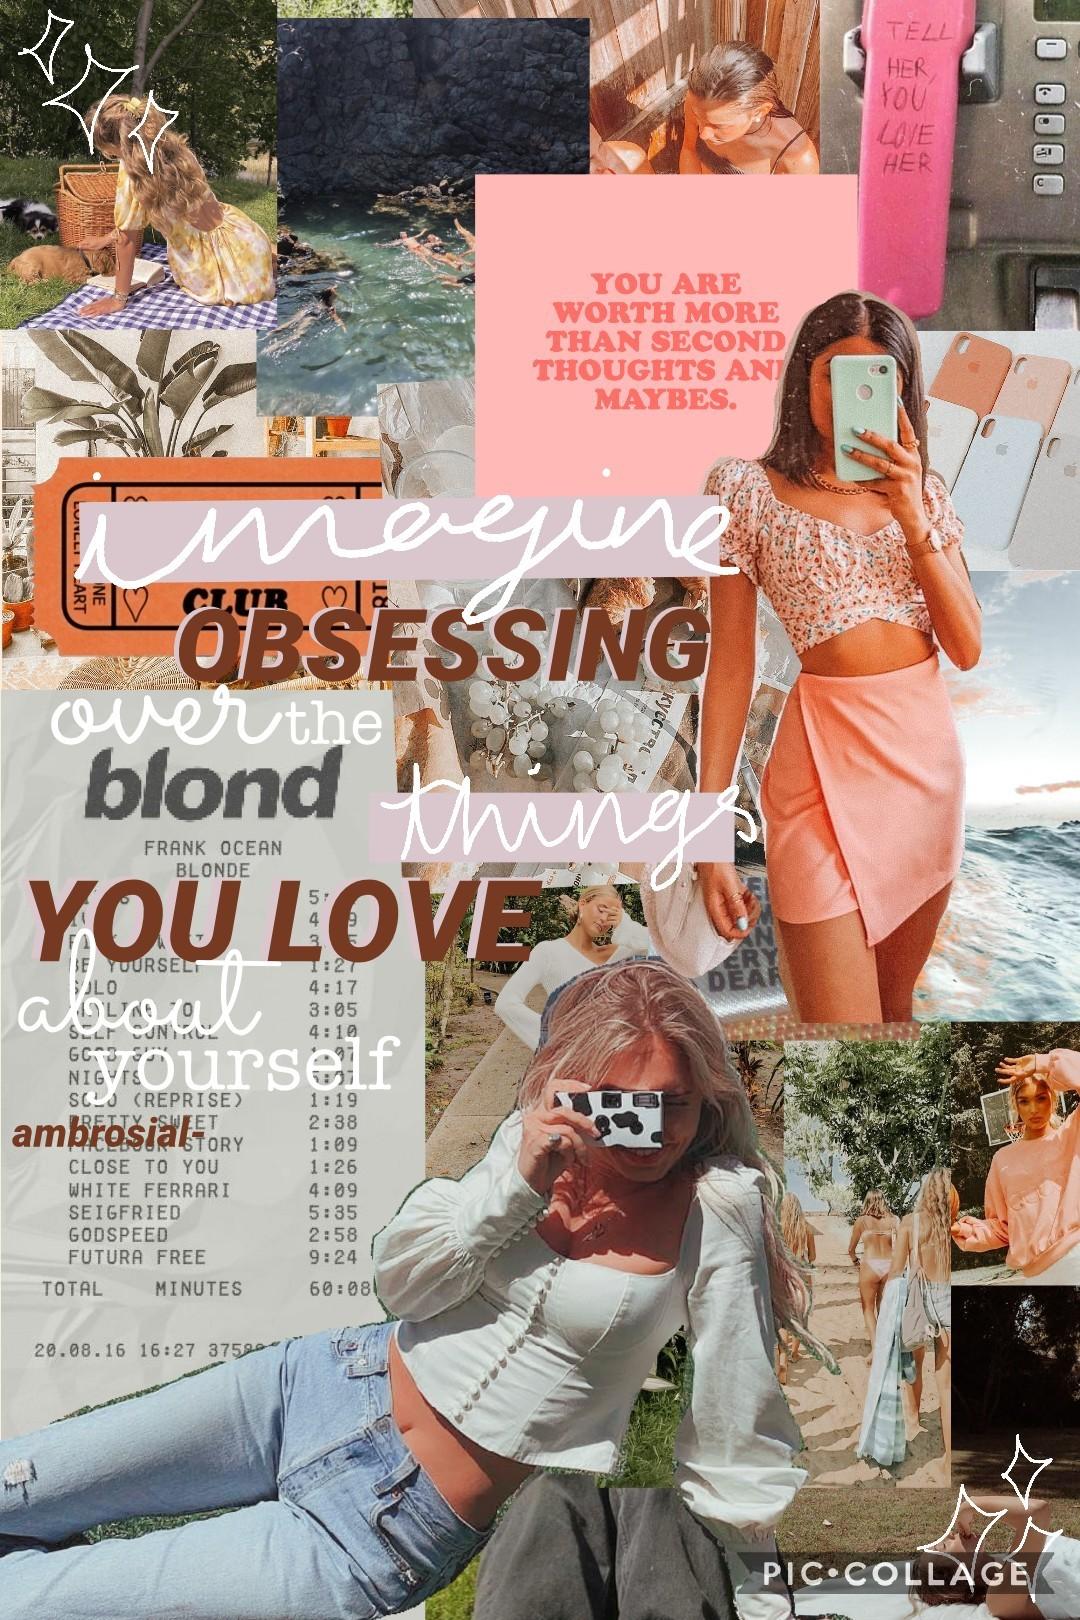 tap 🌸 27/6/20
eeek I like this quick theme change I've got, and the colour palette 🤭🌟 also, what's your Myer Briggs personality type? I'm an INFJ-t 🌿✨